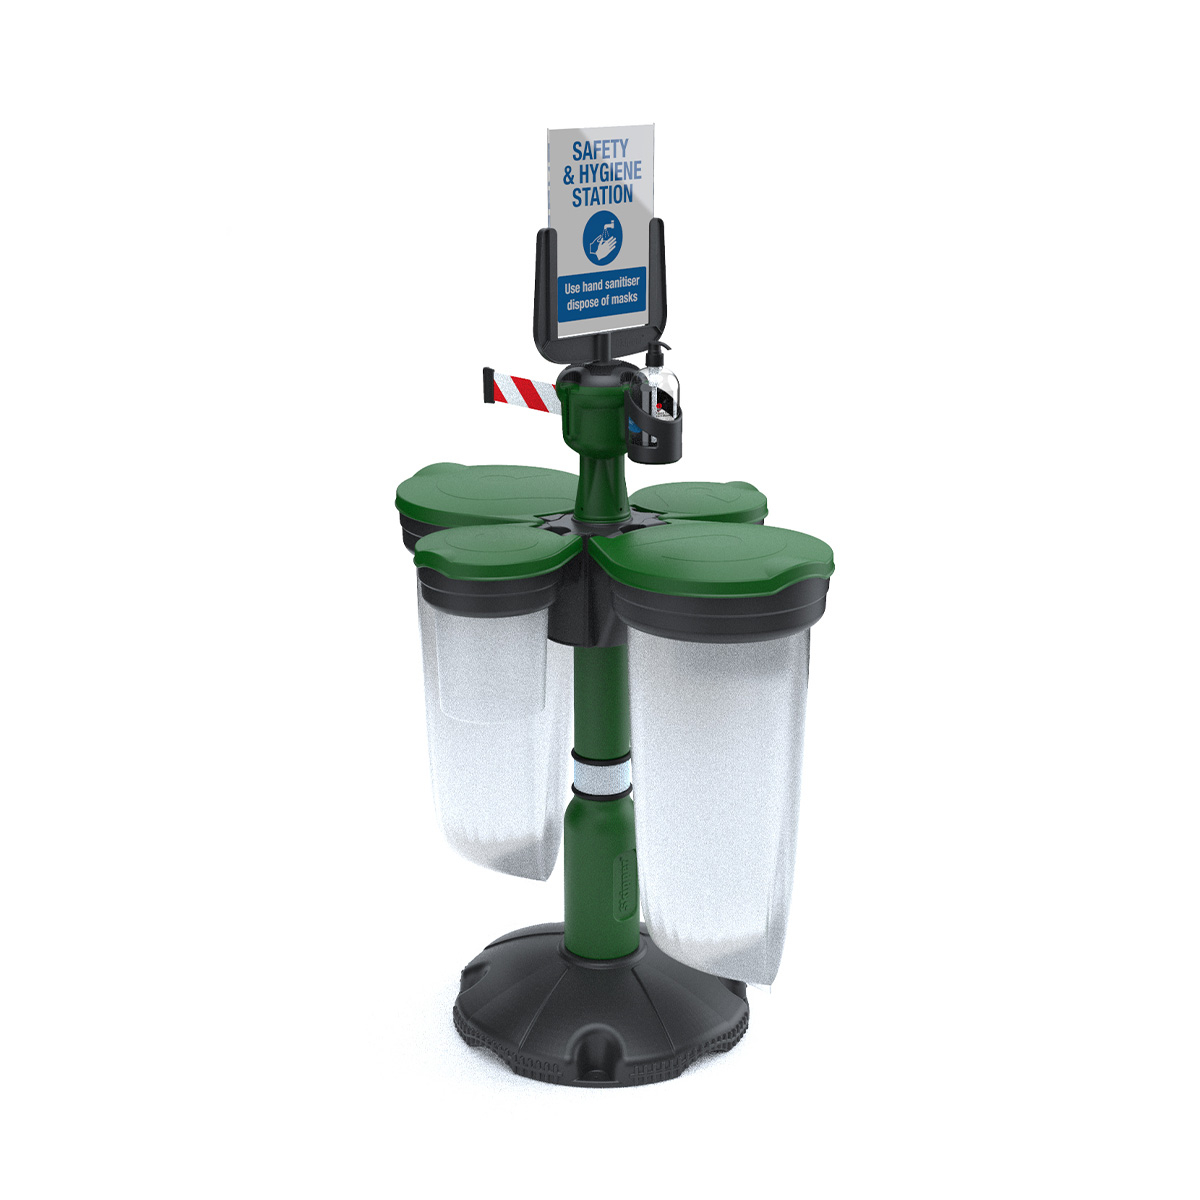 Skipper Retractable Belt And Safety Station 2 With Green Stanchion Post And Recycling Bins And Dispensers